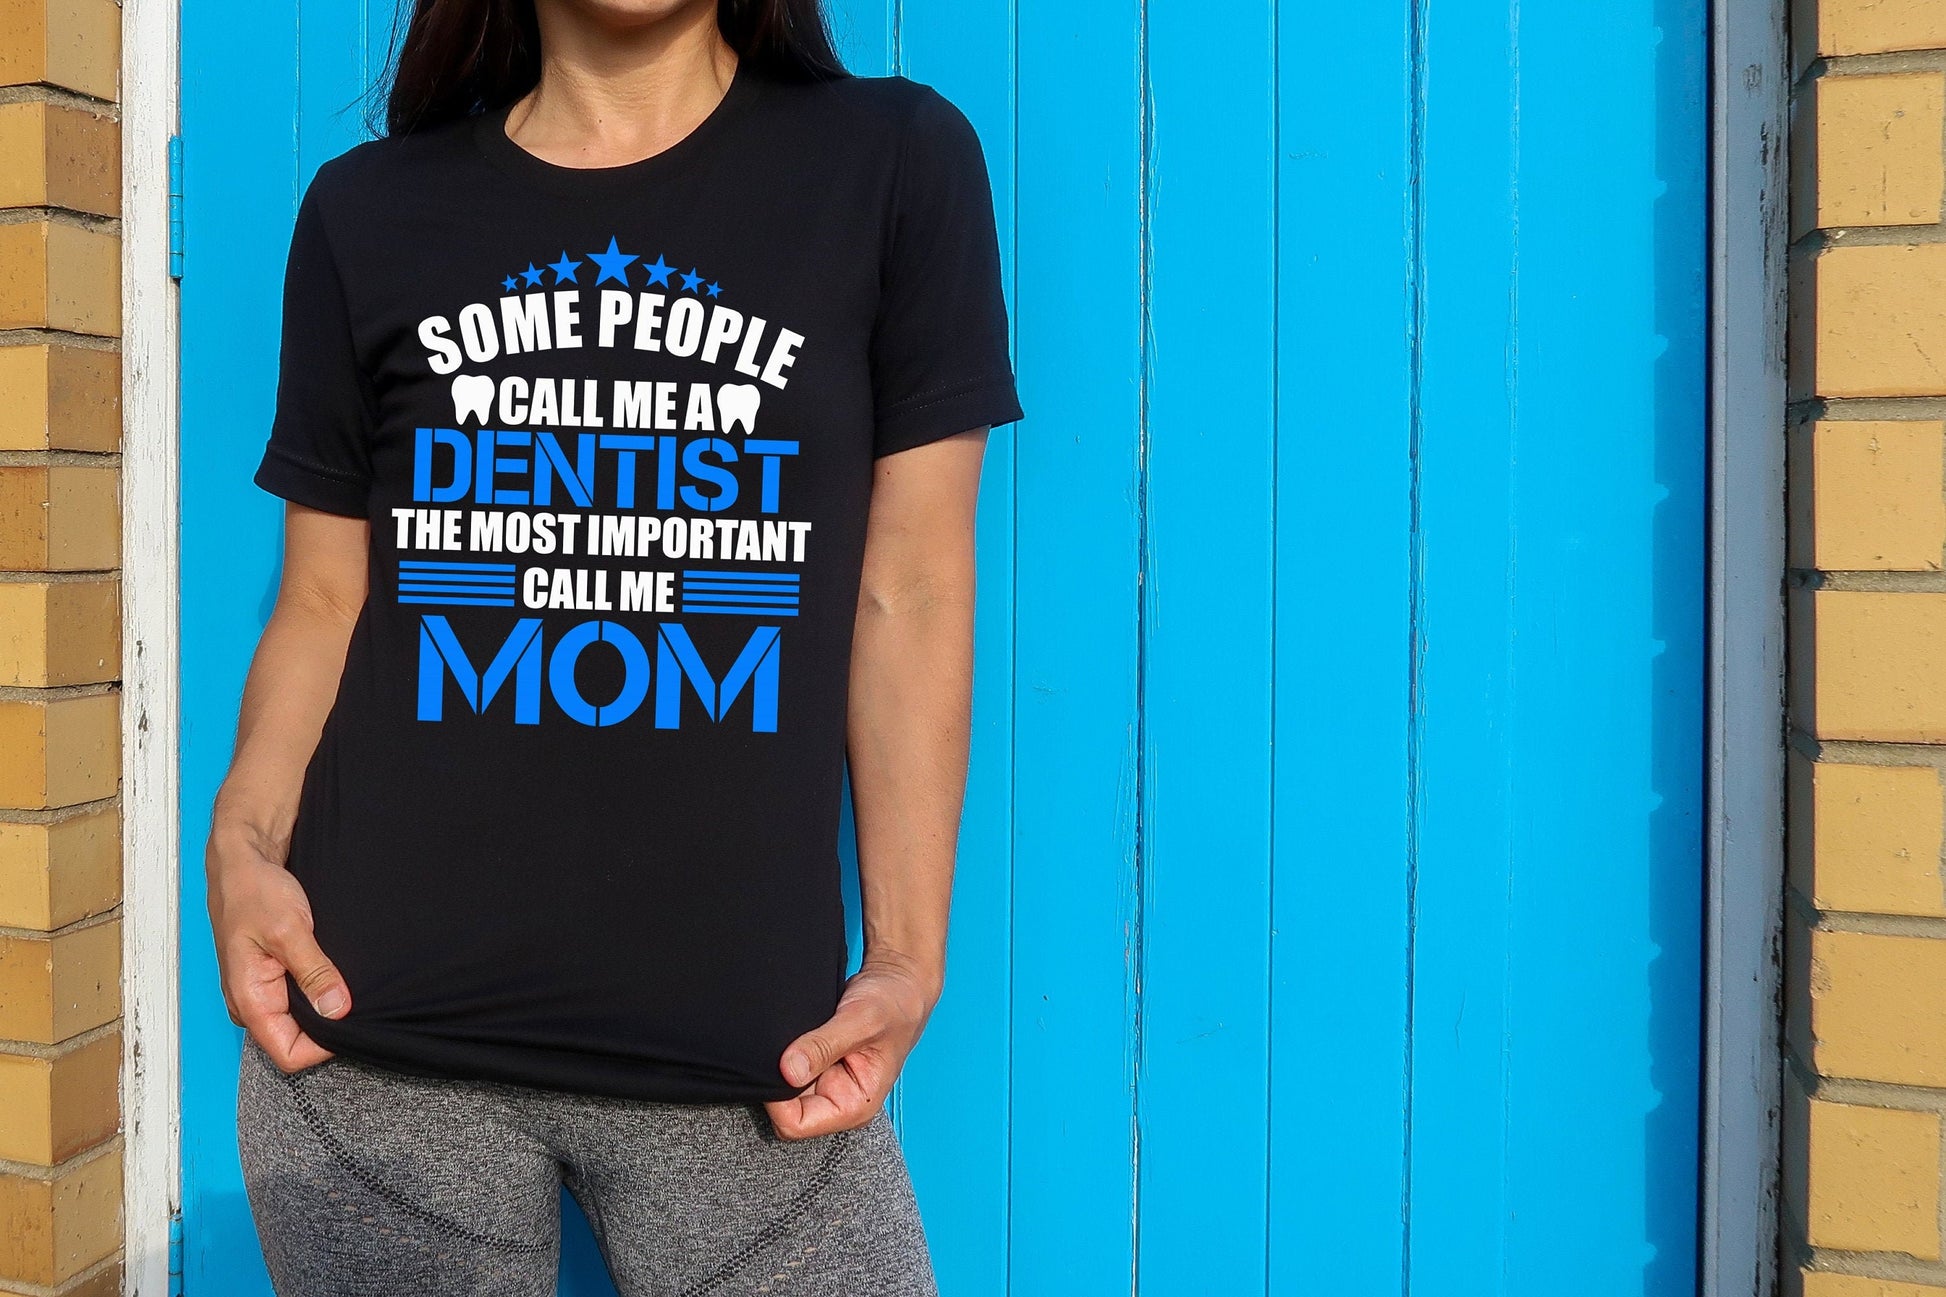 Some People Call Me a Dentist t-shirt - Dentist Mom - Dentist Dad - Mother's Day Shirt - Father's Day Shirt - Dentist Gifts